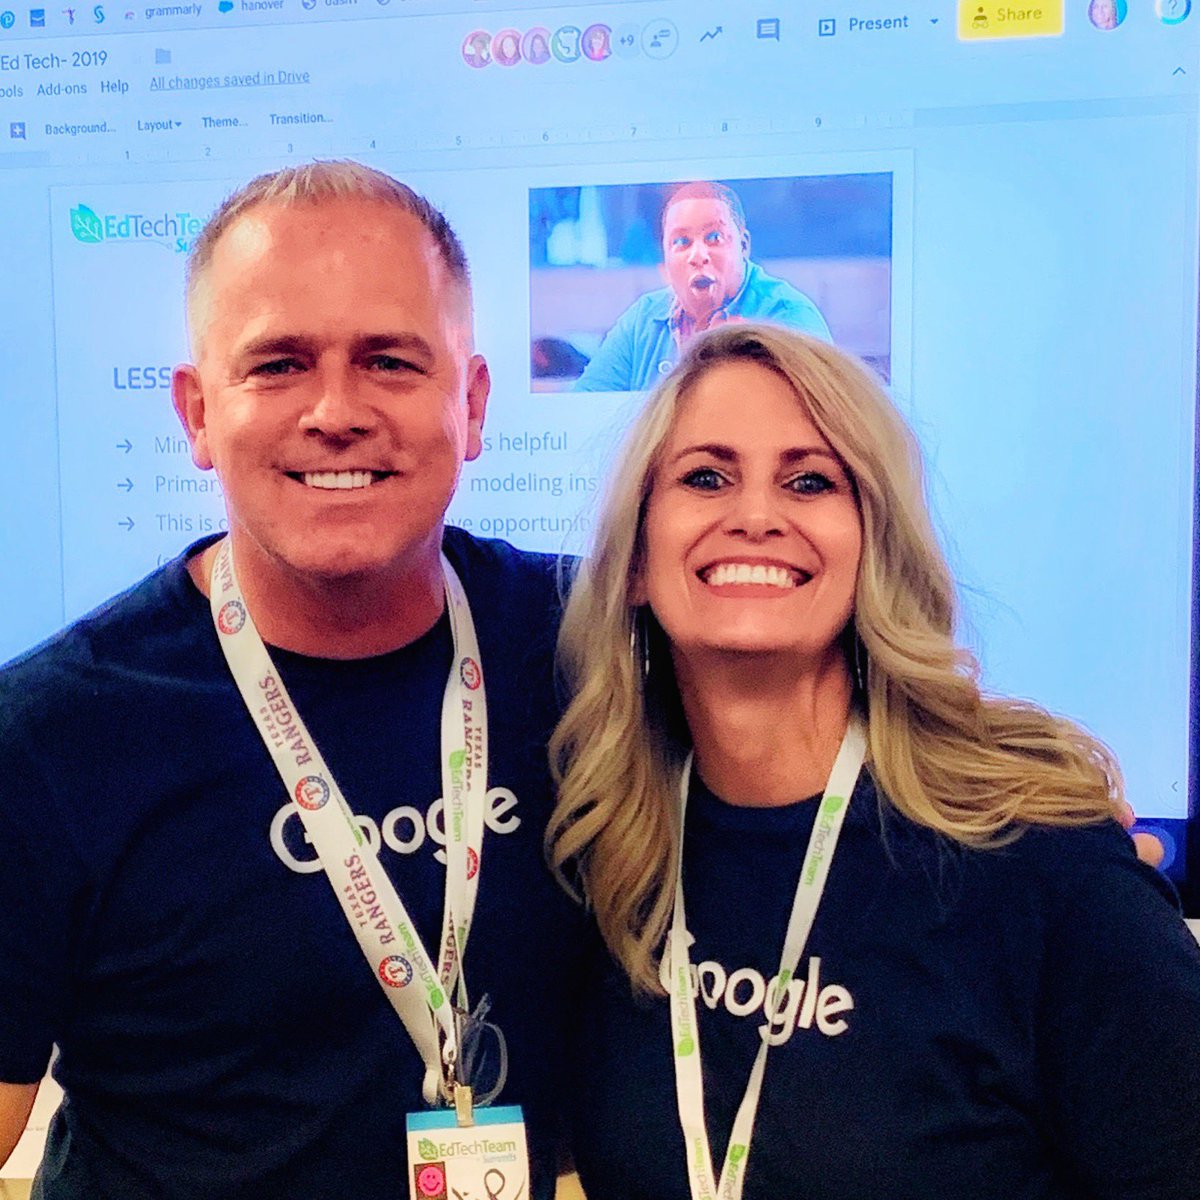 Had so much fun presenting #personalizedpd with @denisedayneeb today!! 💙💛💙🧡
Unintentional photo bomb 😮 is awesome as well! 👍✅😉 #EdTechTeam  @LubbockDL @LubbockISD #hbears1819 @NatWilliamsElem #southplainssummit #personalizedpd